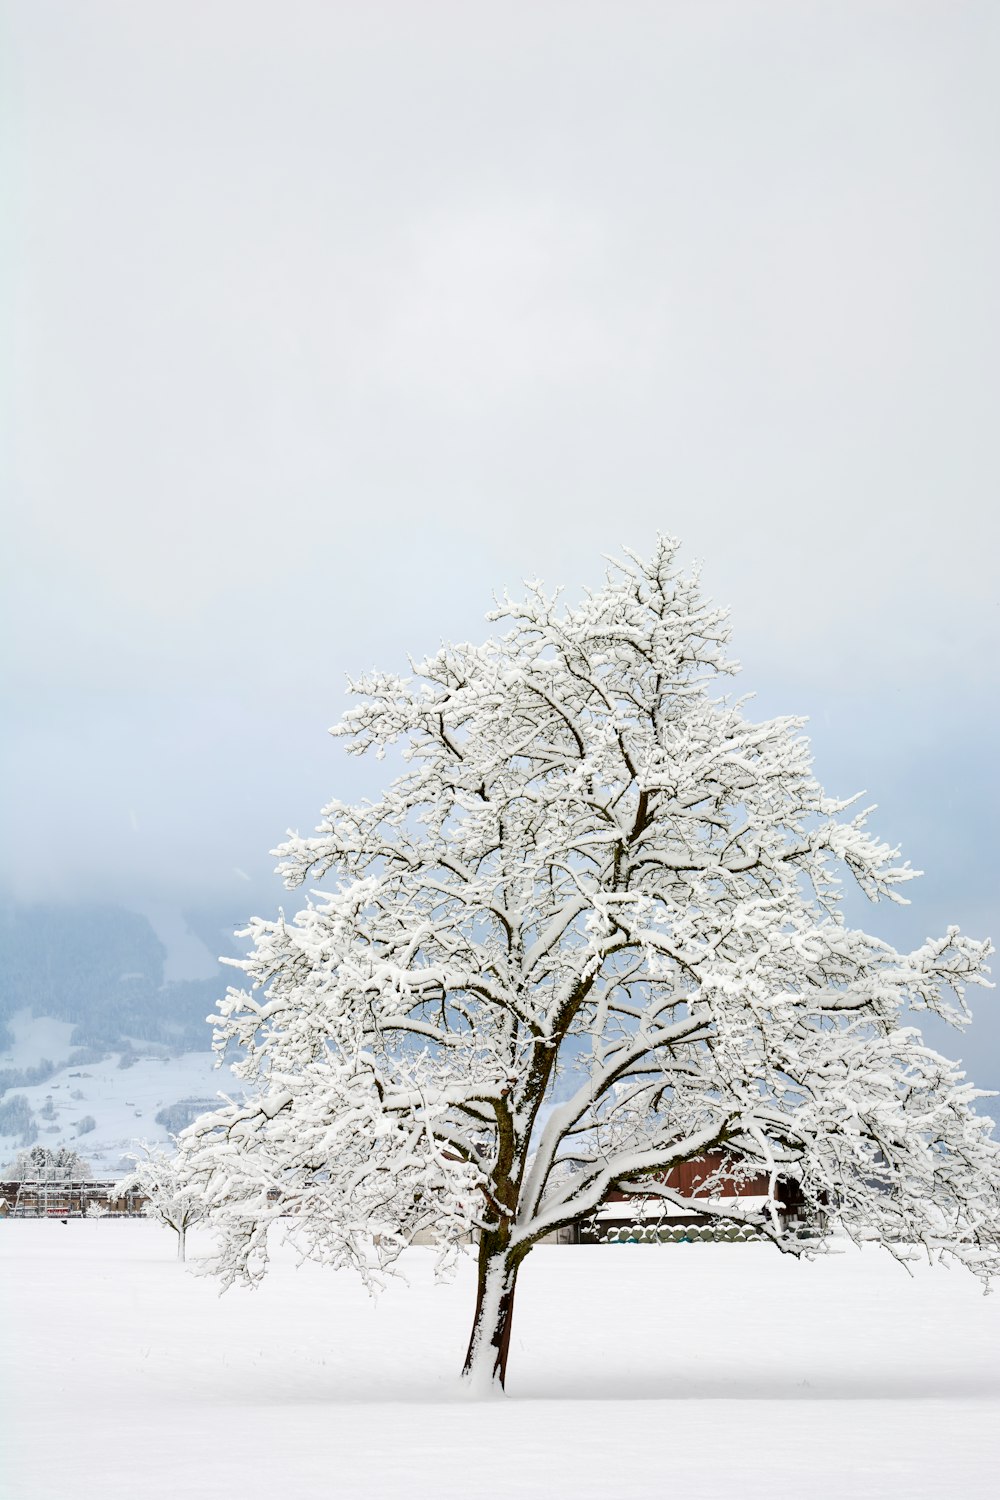 a tree in a snowy place